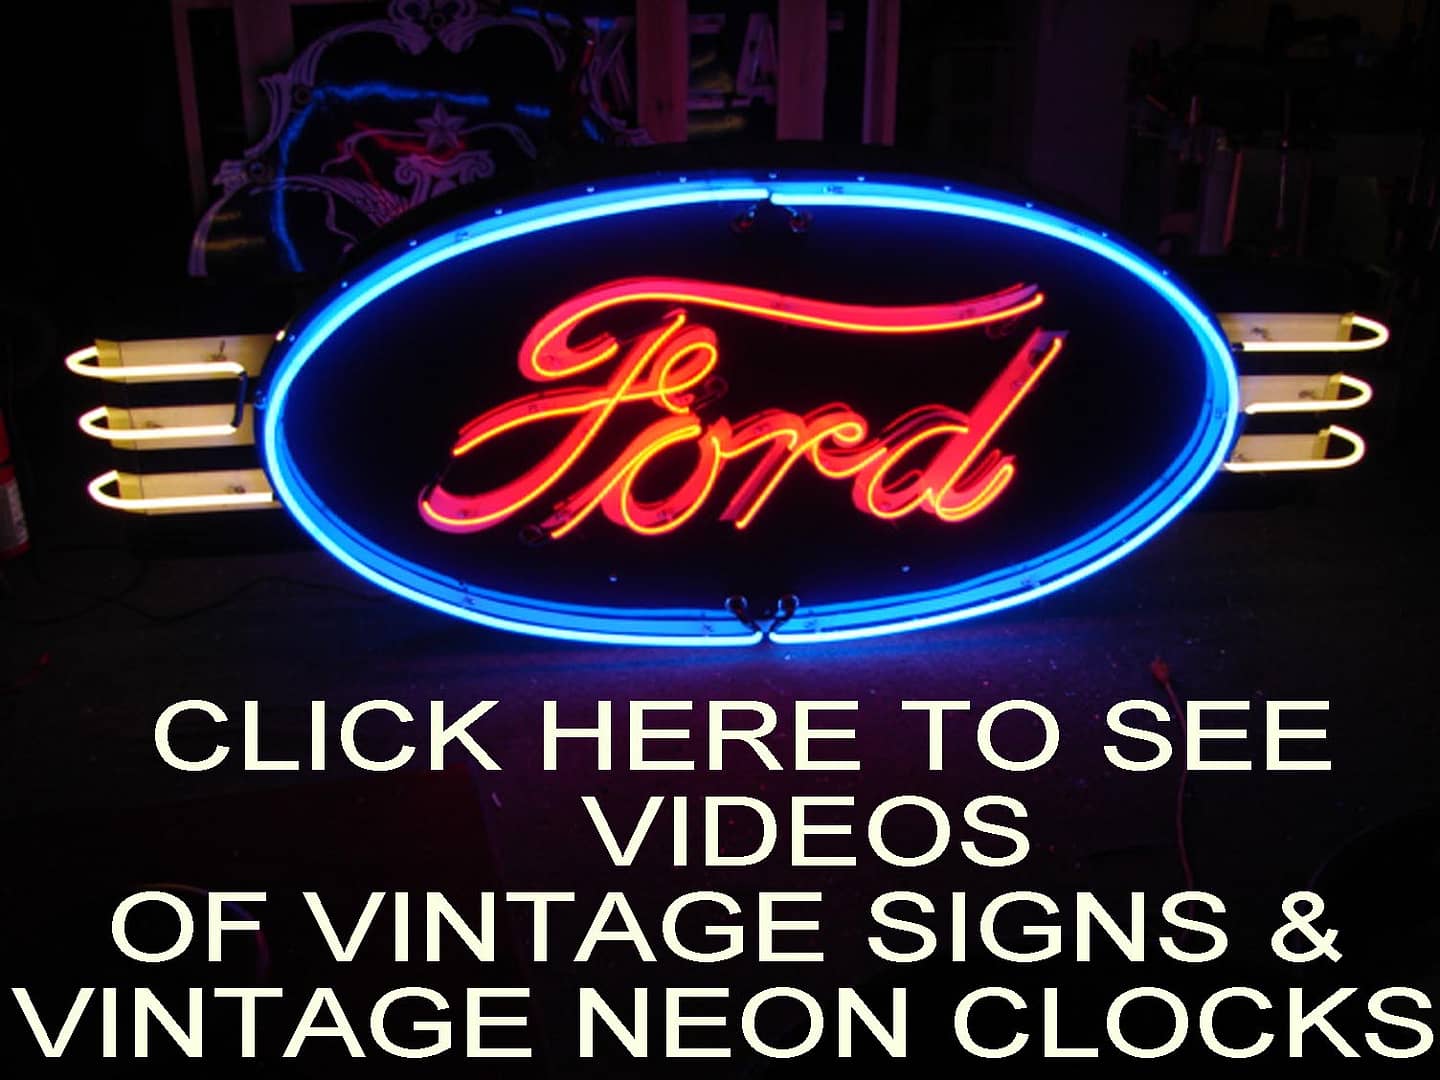 To view our vintage signs collection